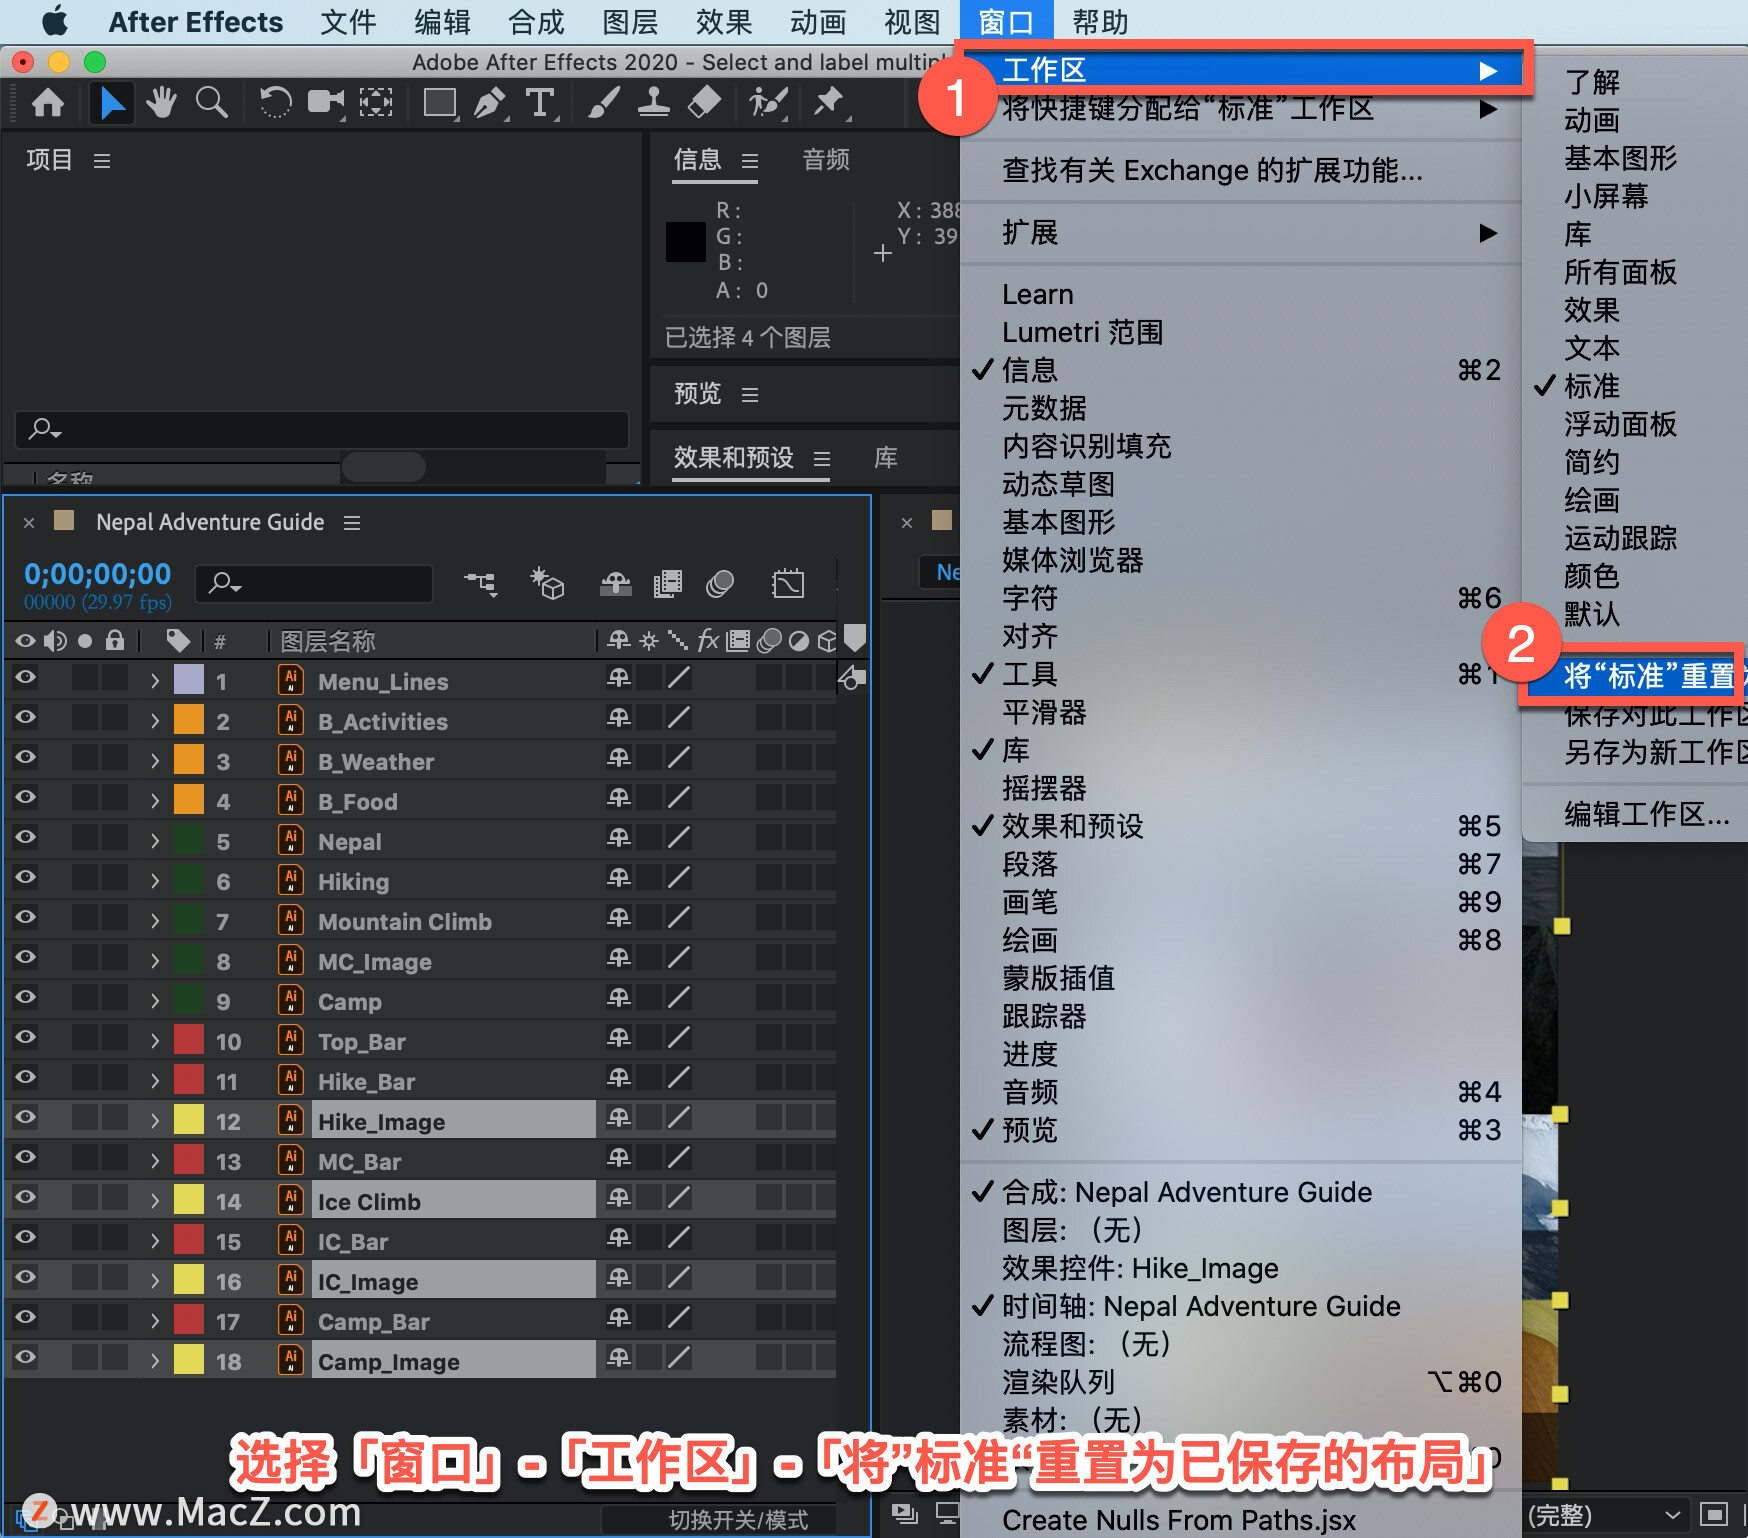 After Effects 教程「46」，如何在 After Effects 中更改多个图层的标签颜色？